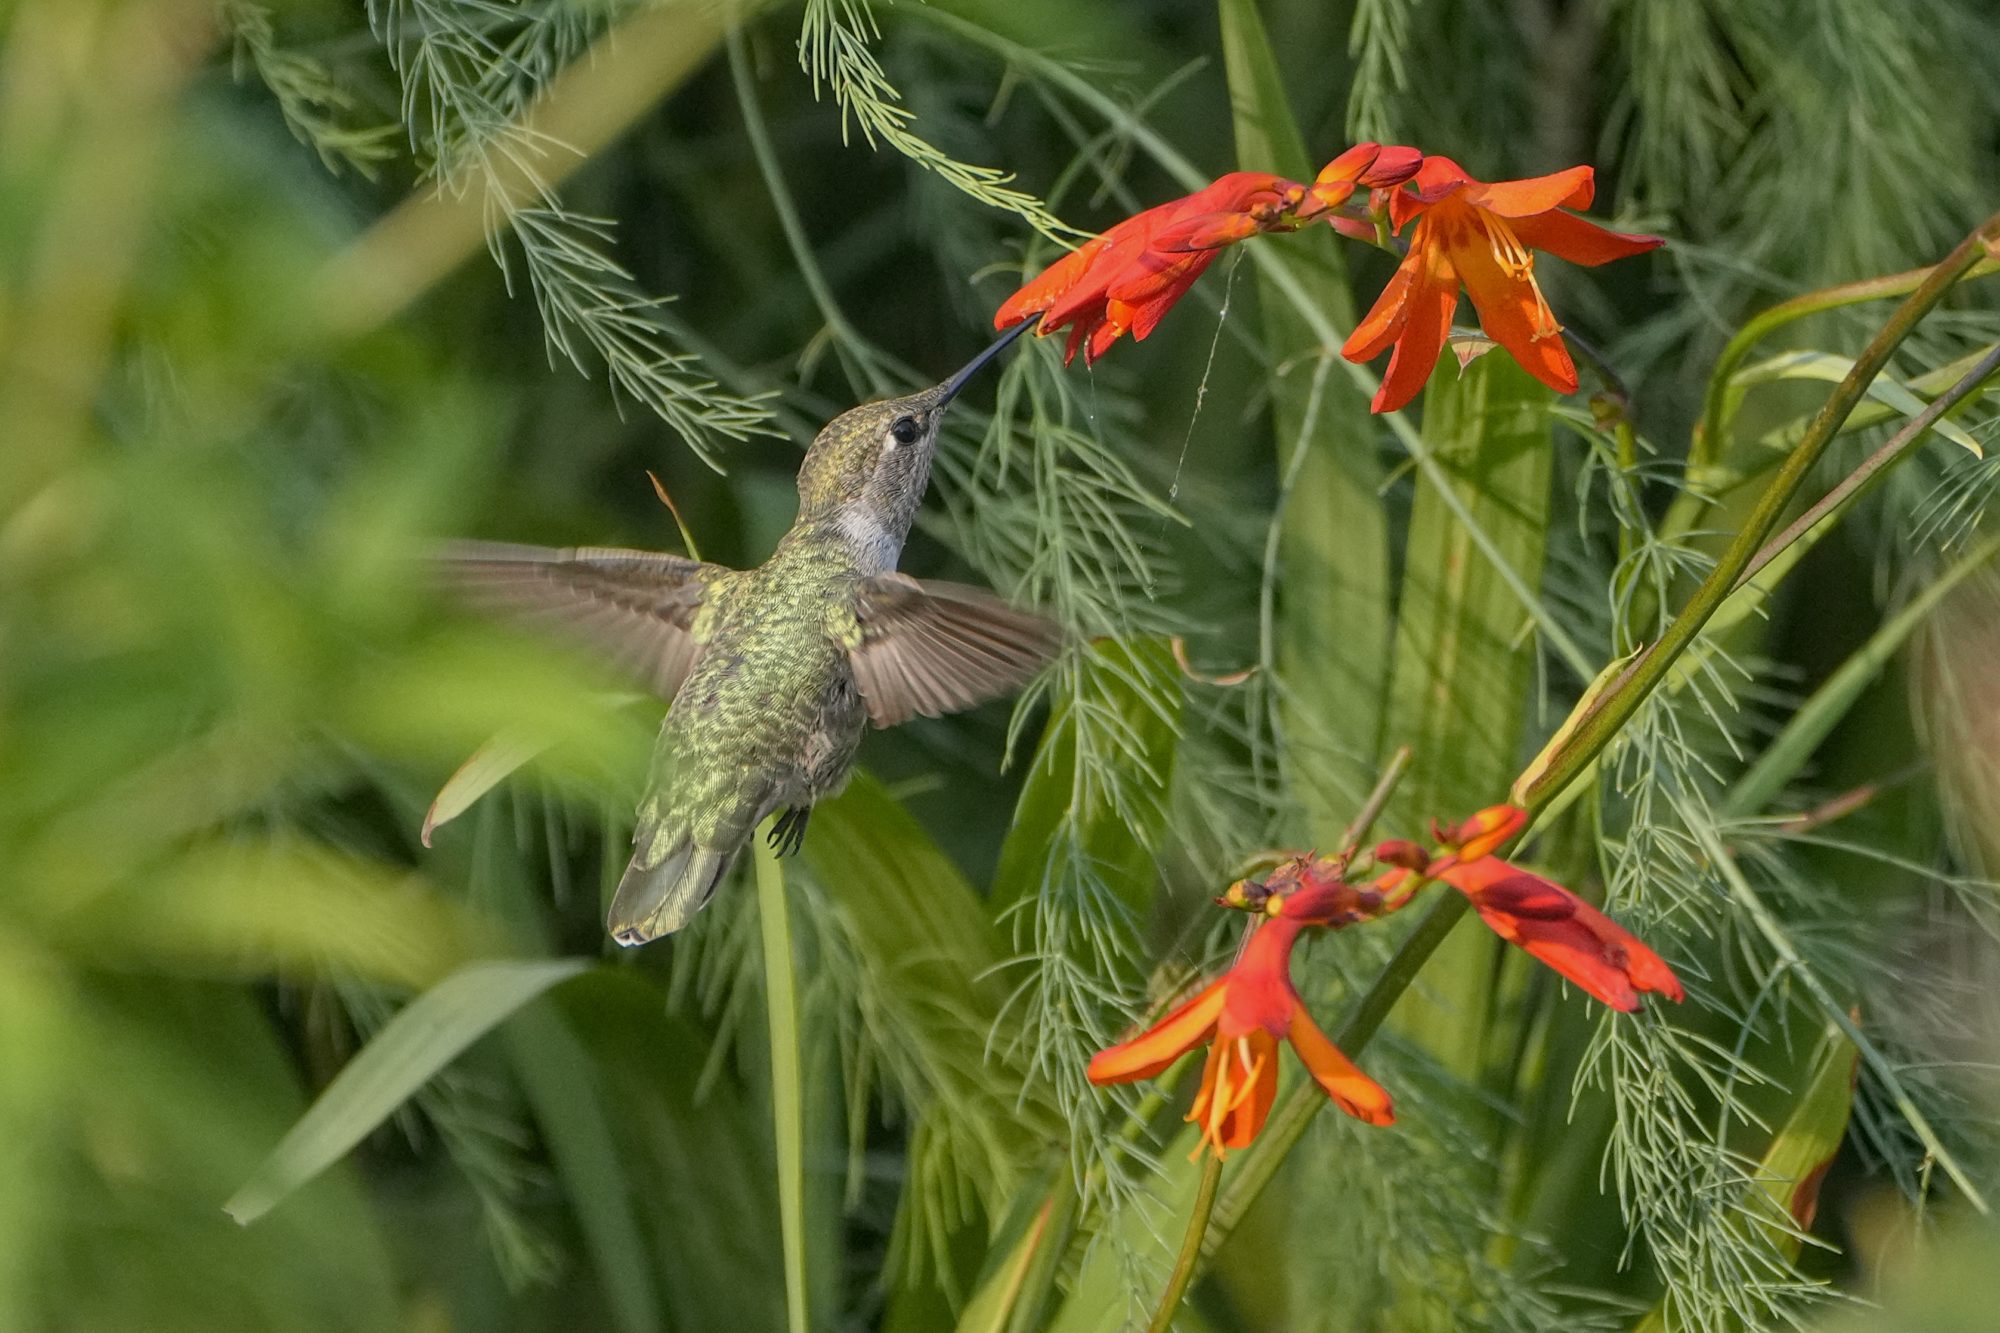 A Female Anna's Hummingbird is feeding from some red flowers